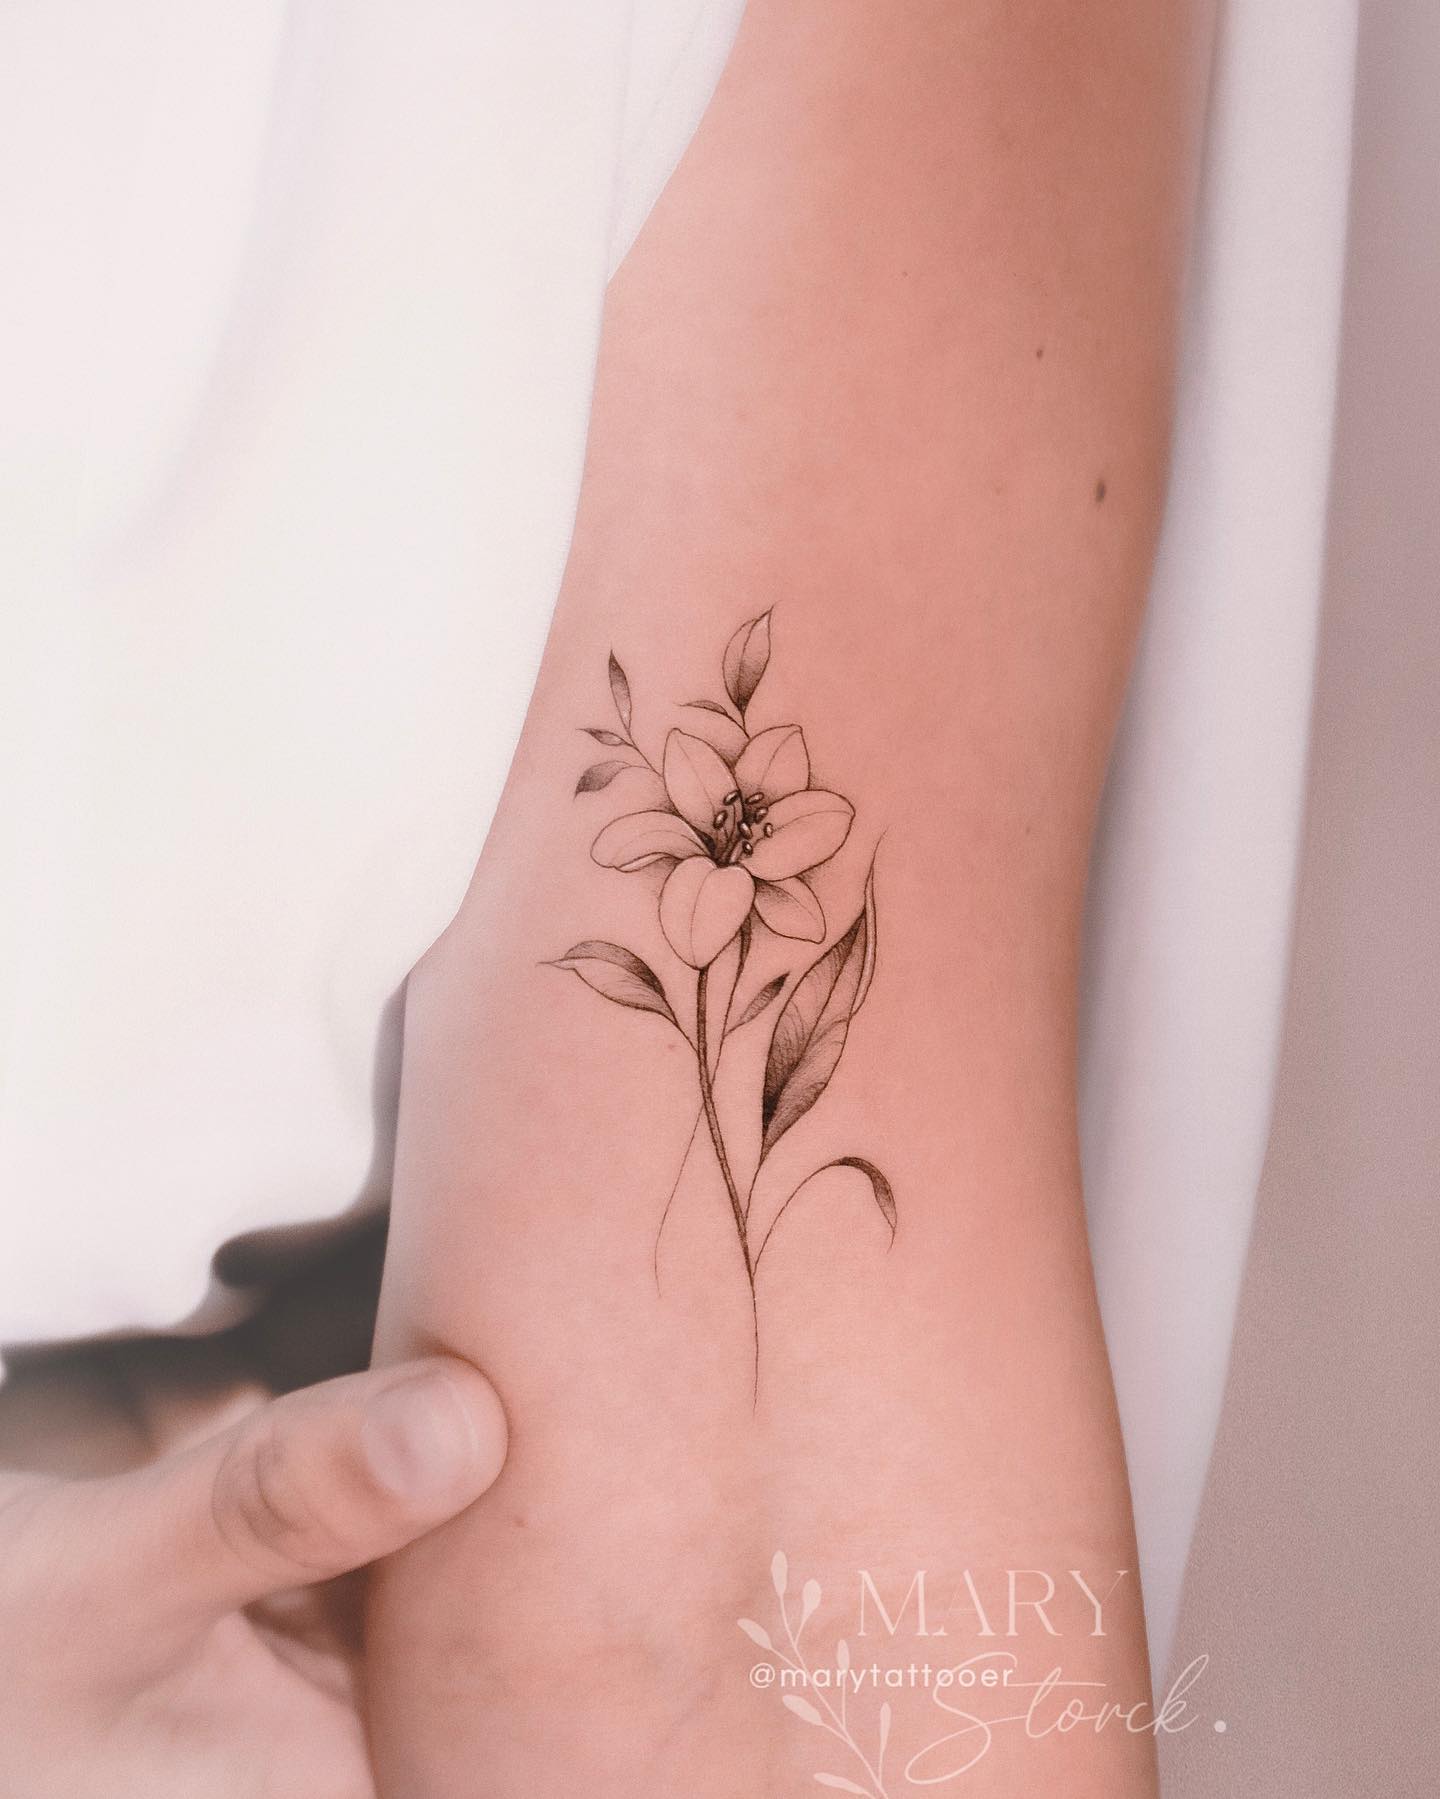 Linework lily tattoos are a lot like regular lilies, but they're much more delicate. They are usually very thin and they are quite amazing. If you want to have a simple and elegant lily on your arm, this is the one you should go for!